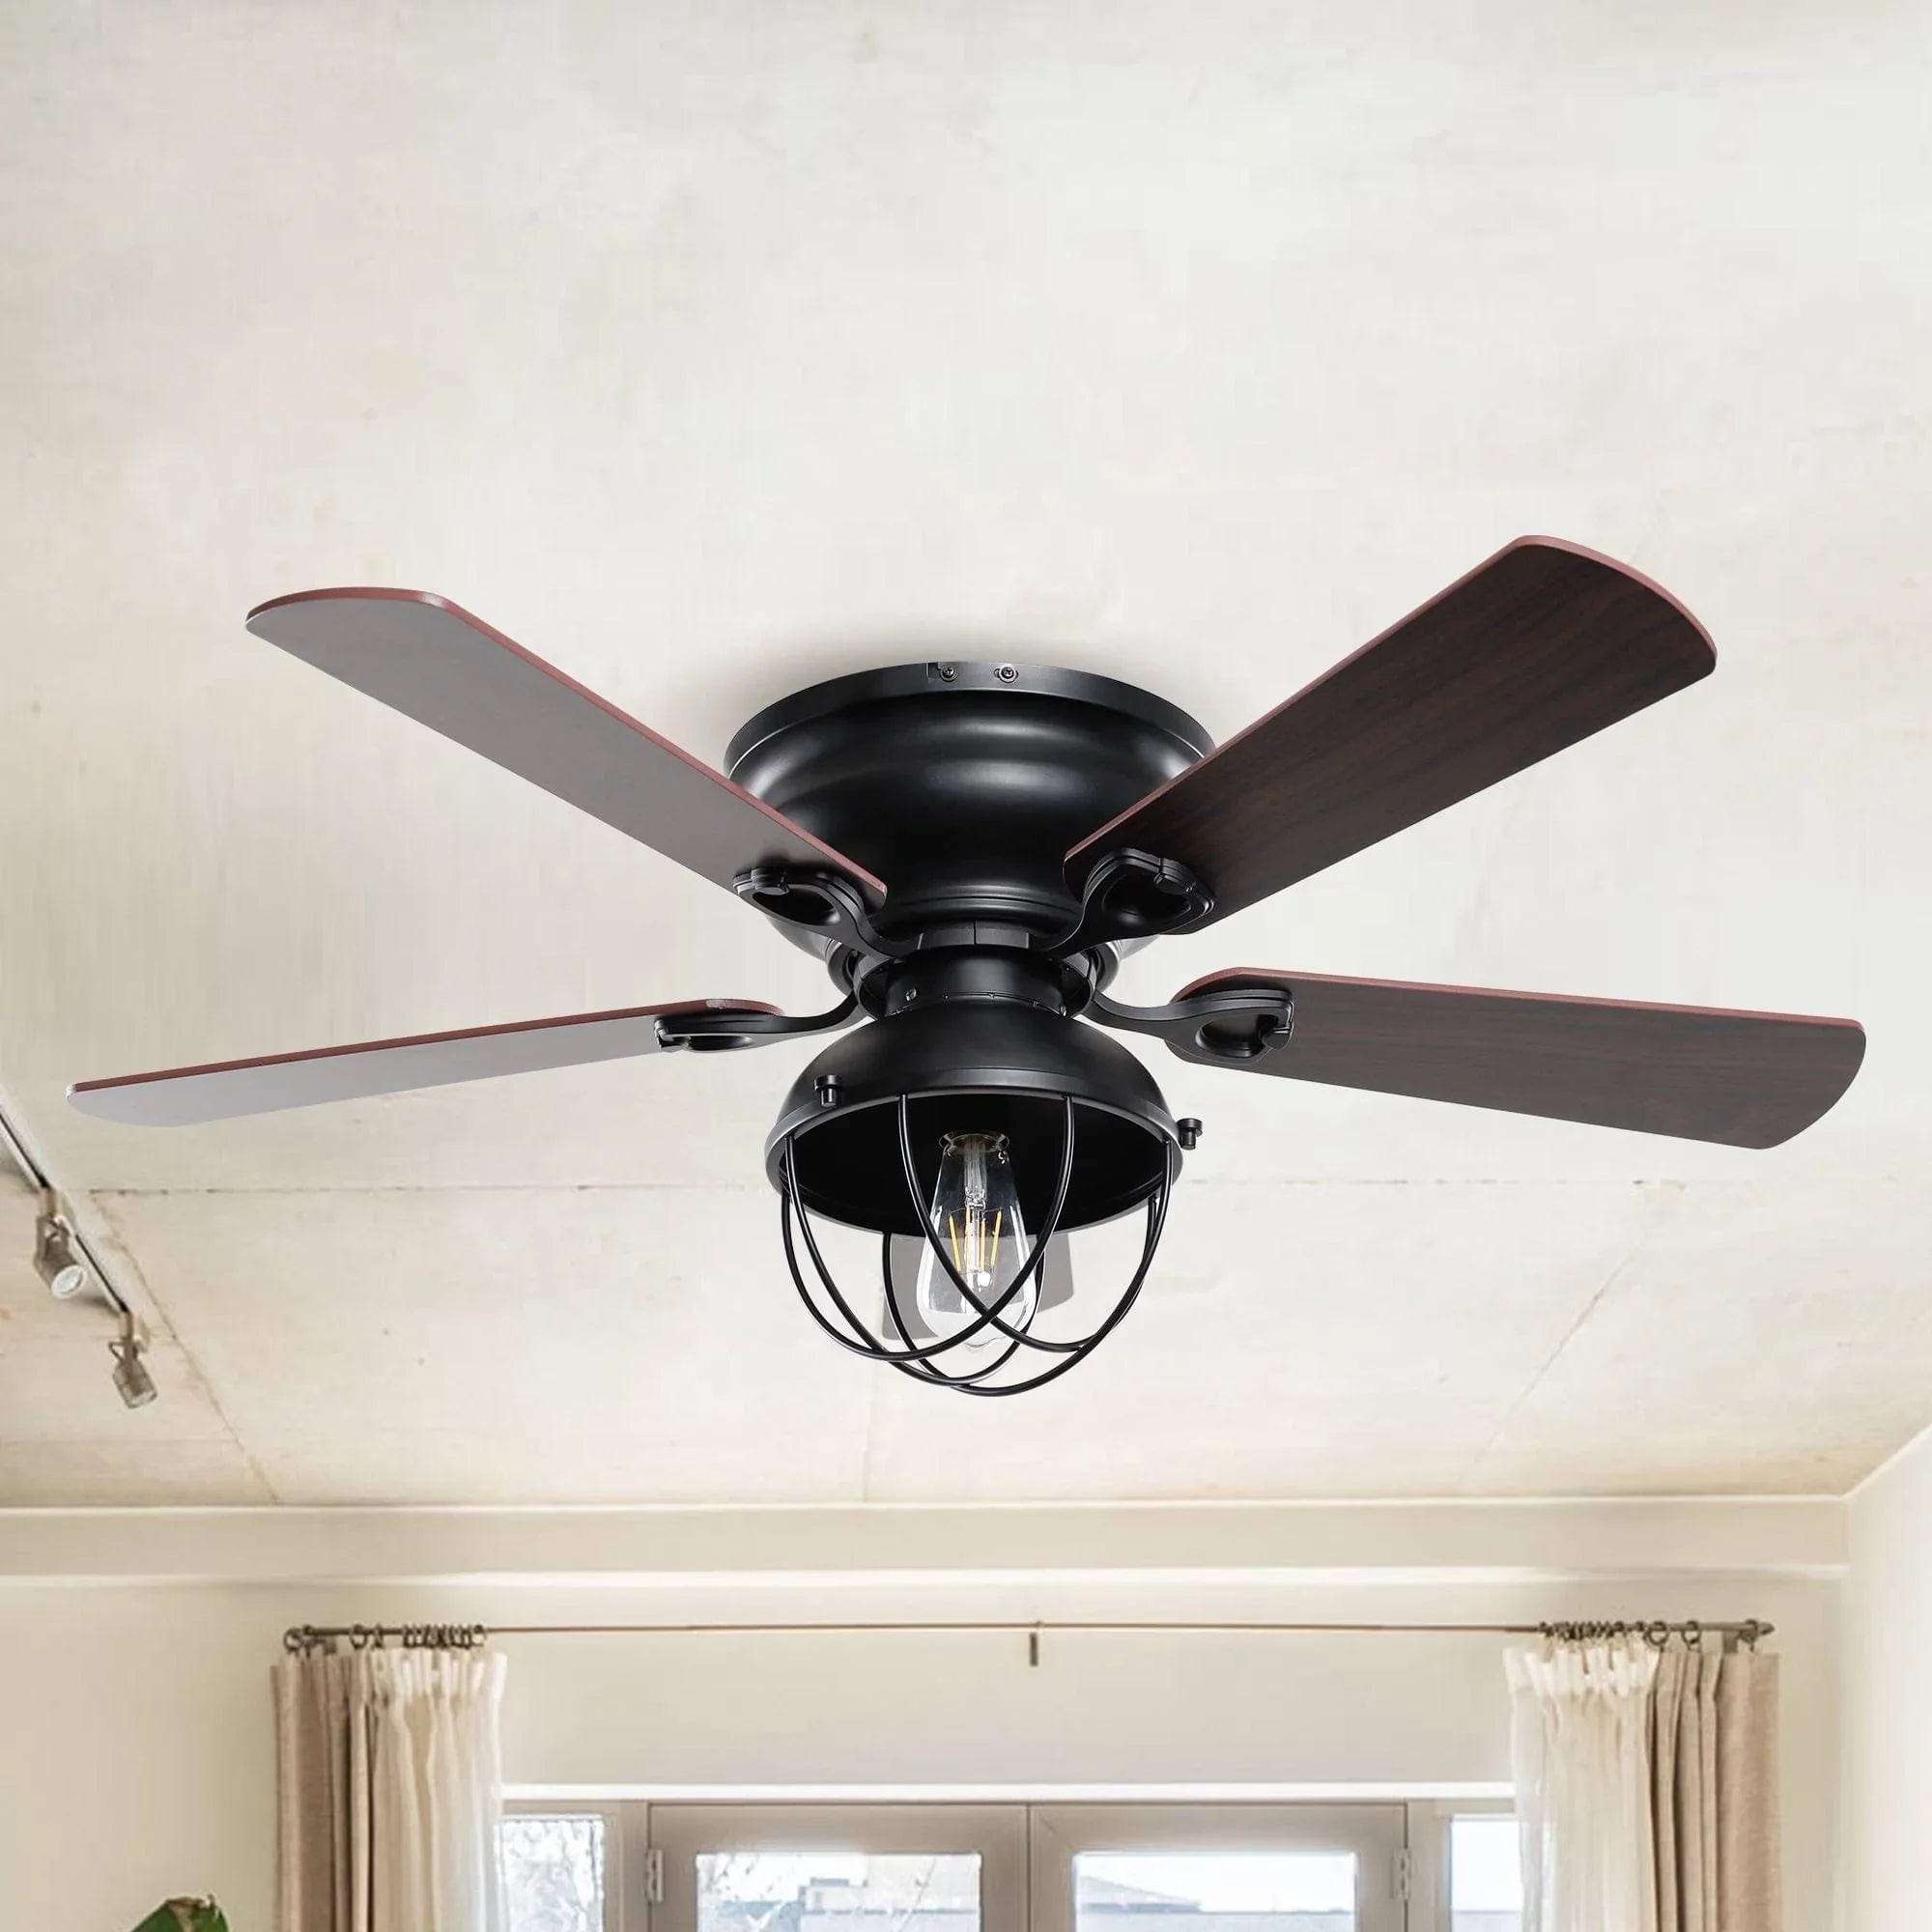 Parrot Uncle Parrot Uncle 42 In. Industrial Ceiling Fan with Lighting and Remote Control Ceiling Fan F6232Q110V